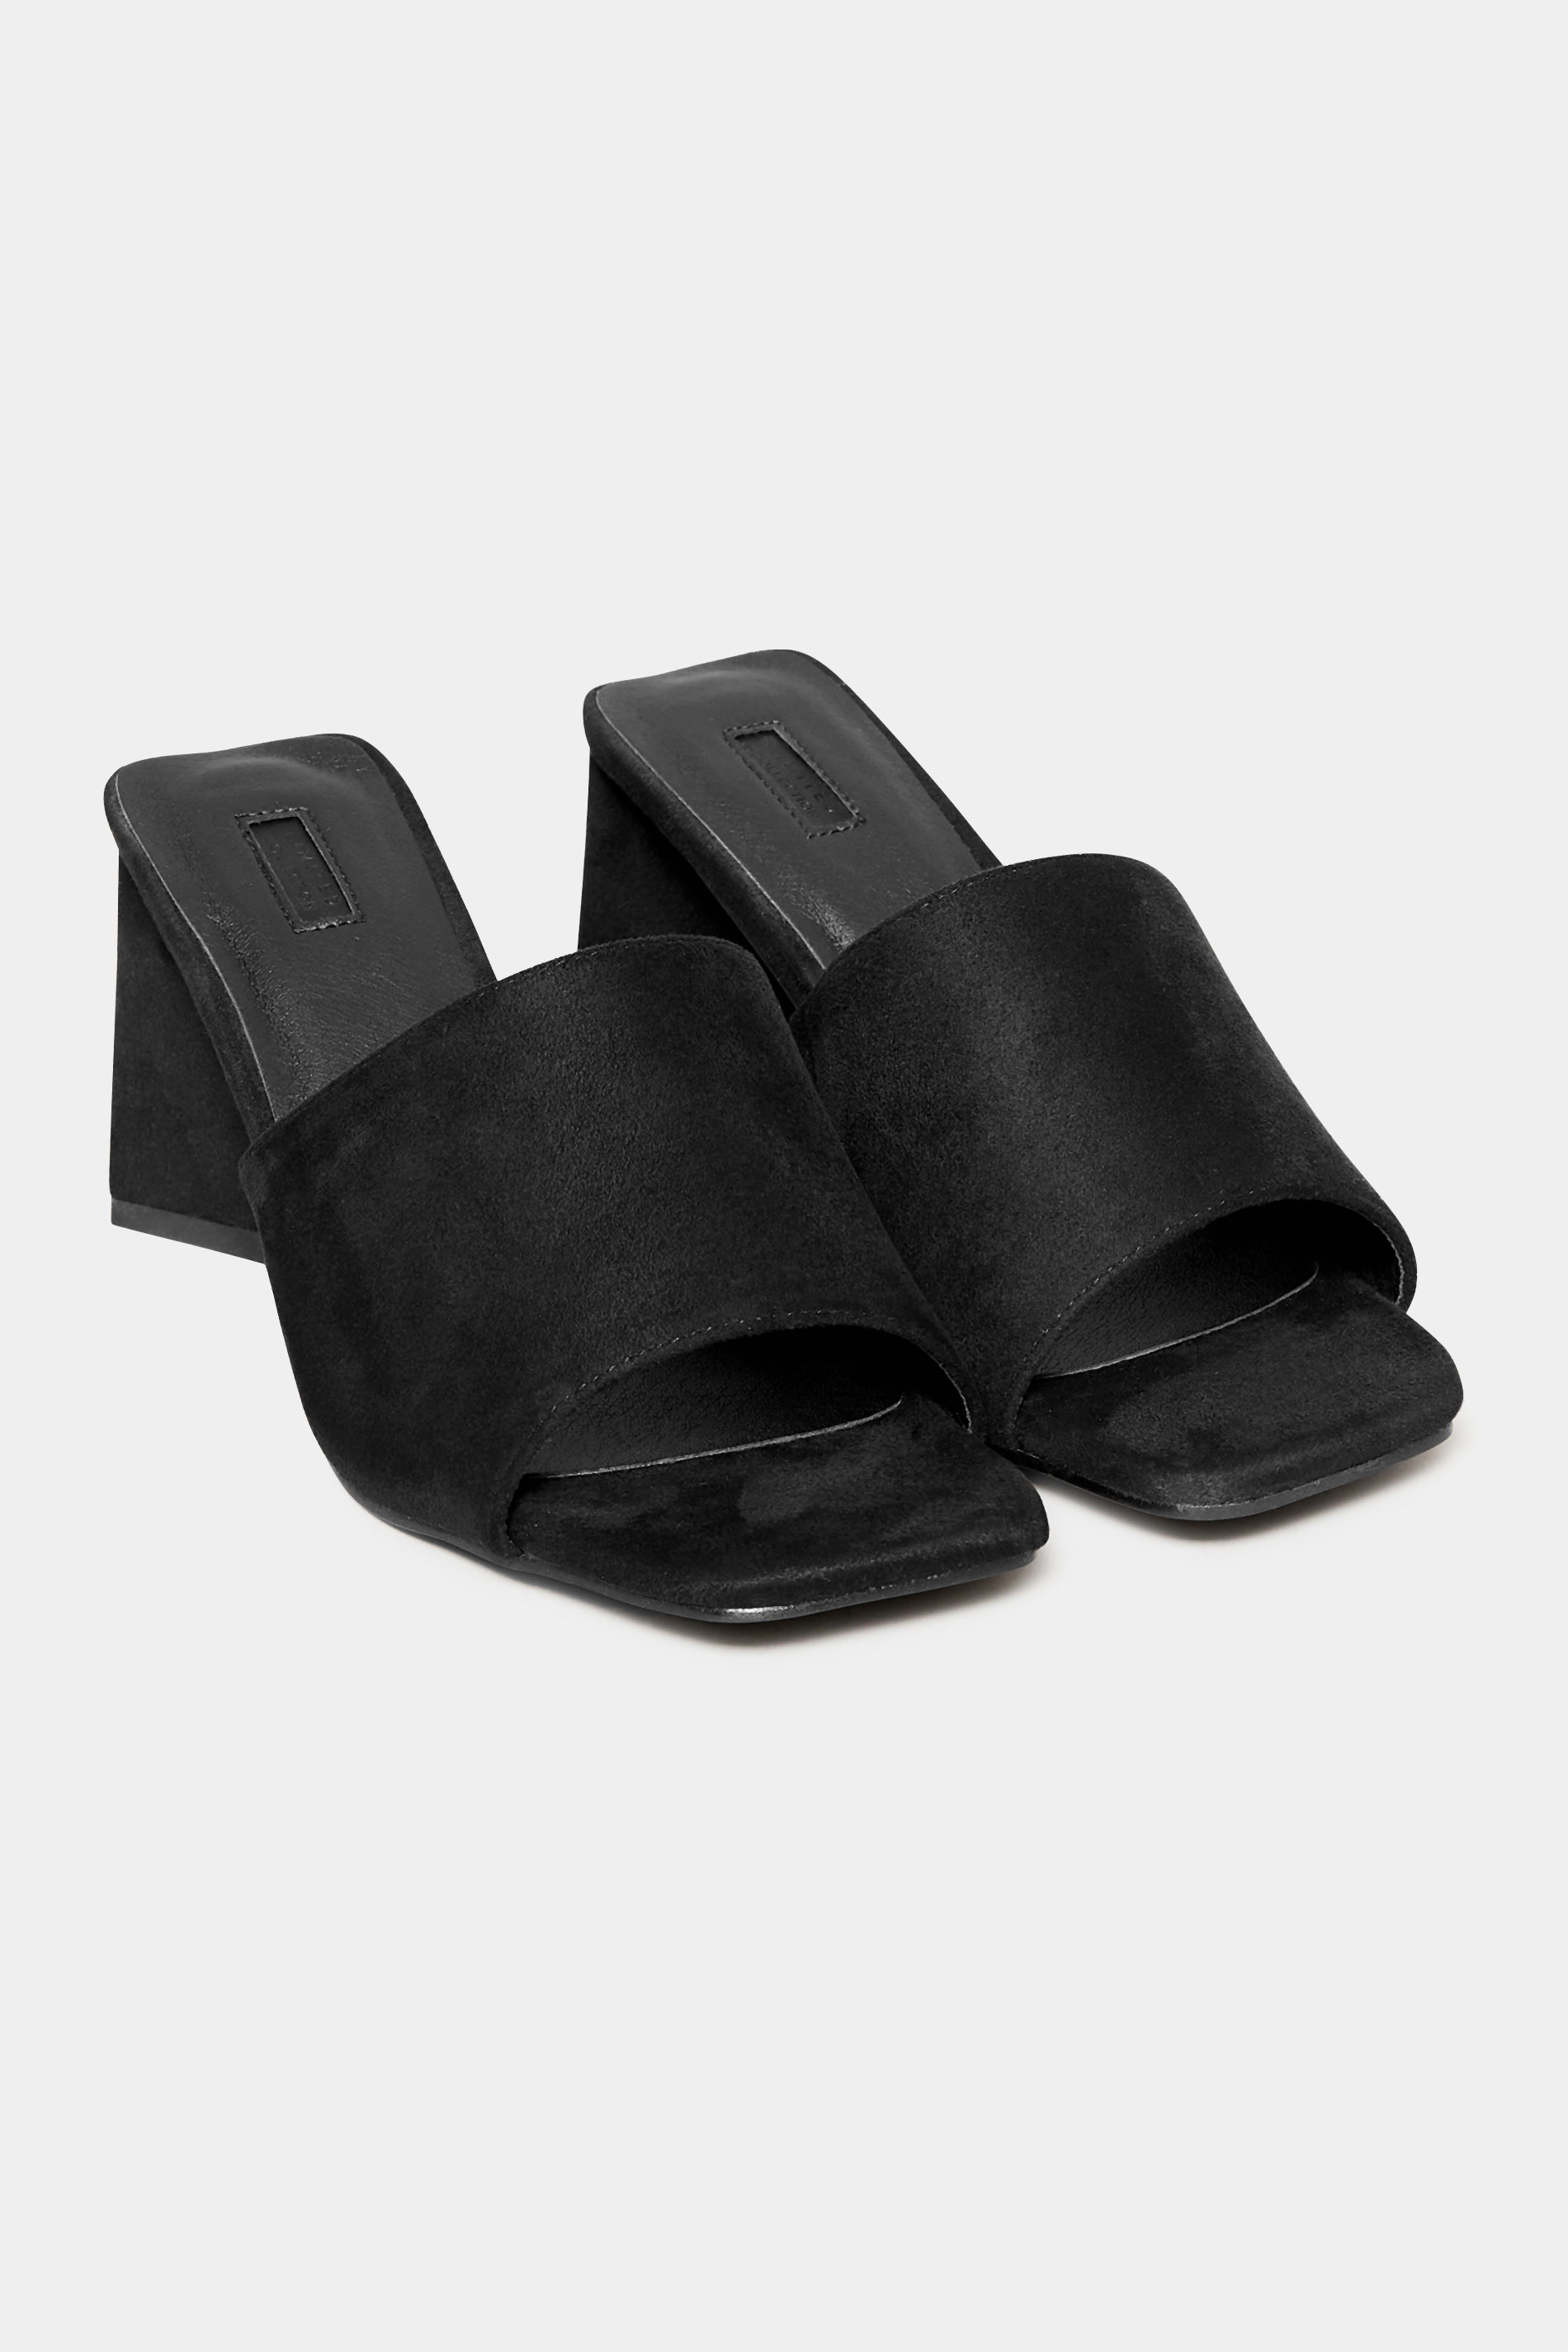 LIMITED COLLECTION Black Triangular Heeled Mules In Wide E Fit & Extra Wide EEE Fit 1